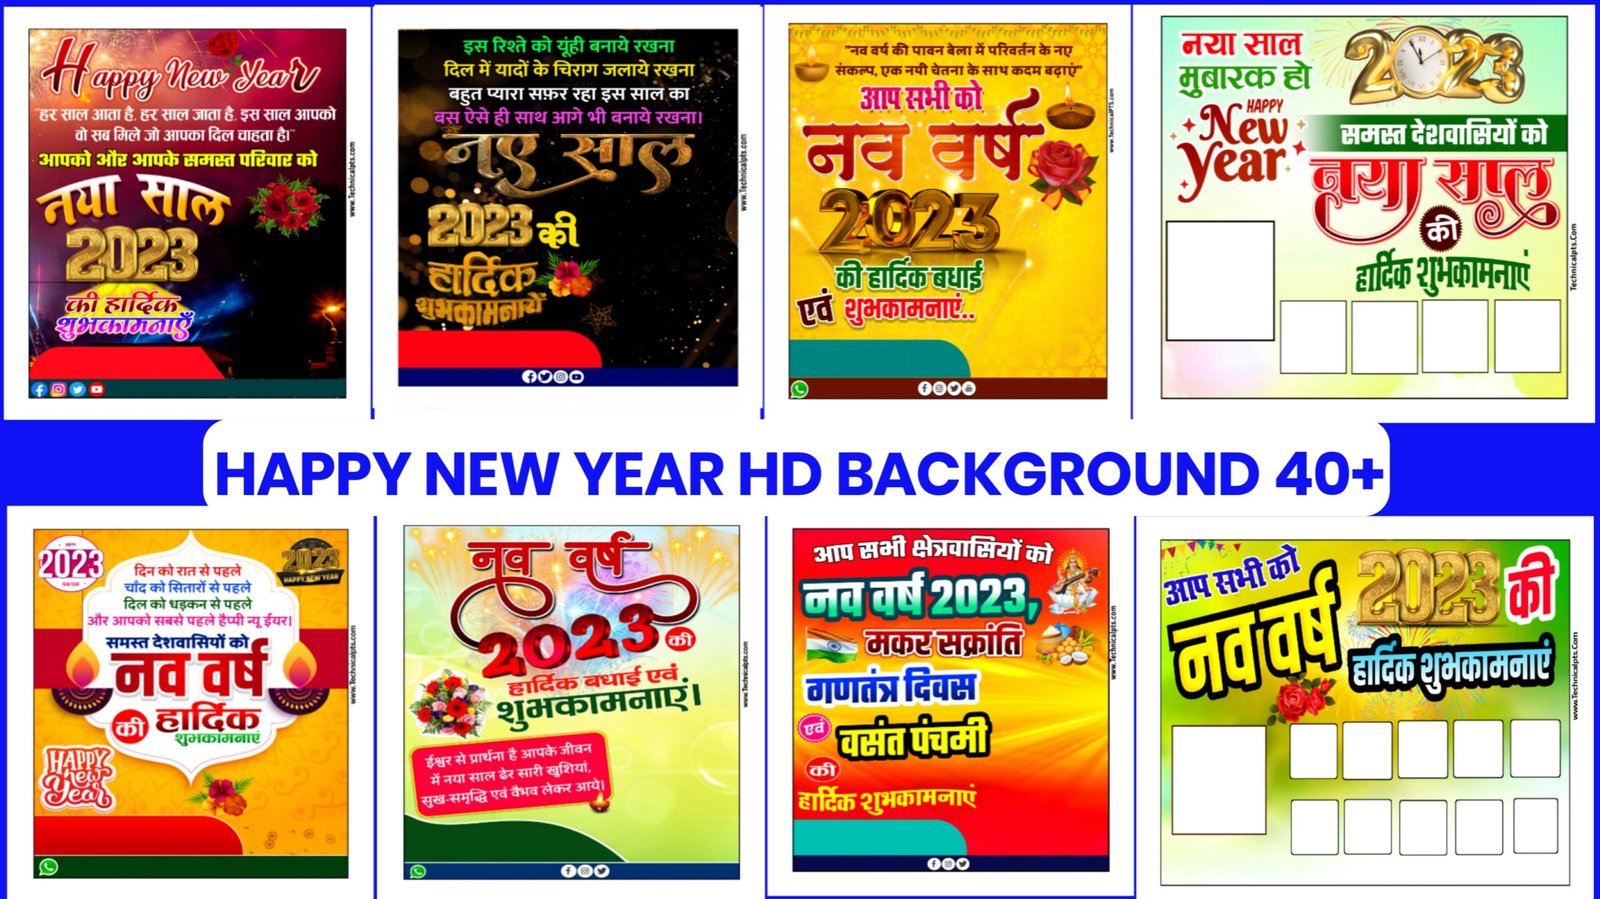 Happy New year 2023 blank poster background| naya sal 2030 blank poster background| Happy New year blank DP background images download|